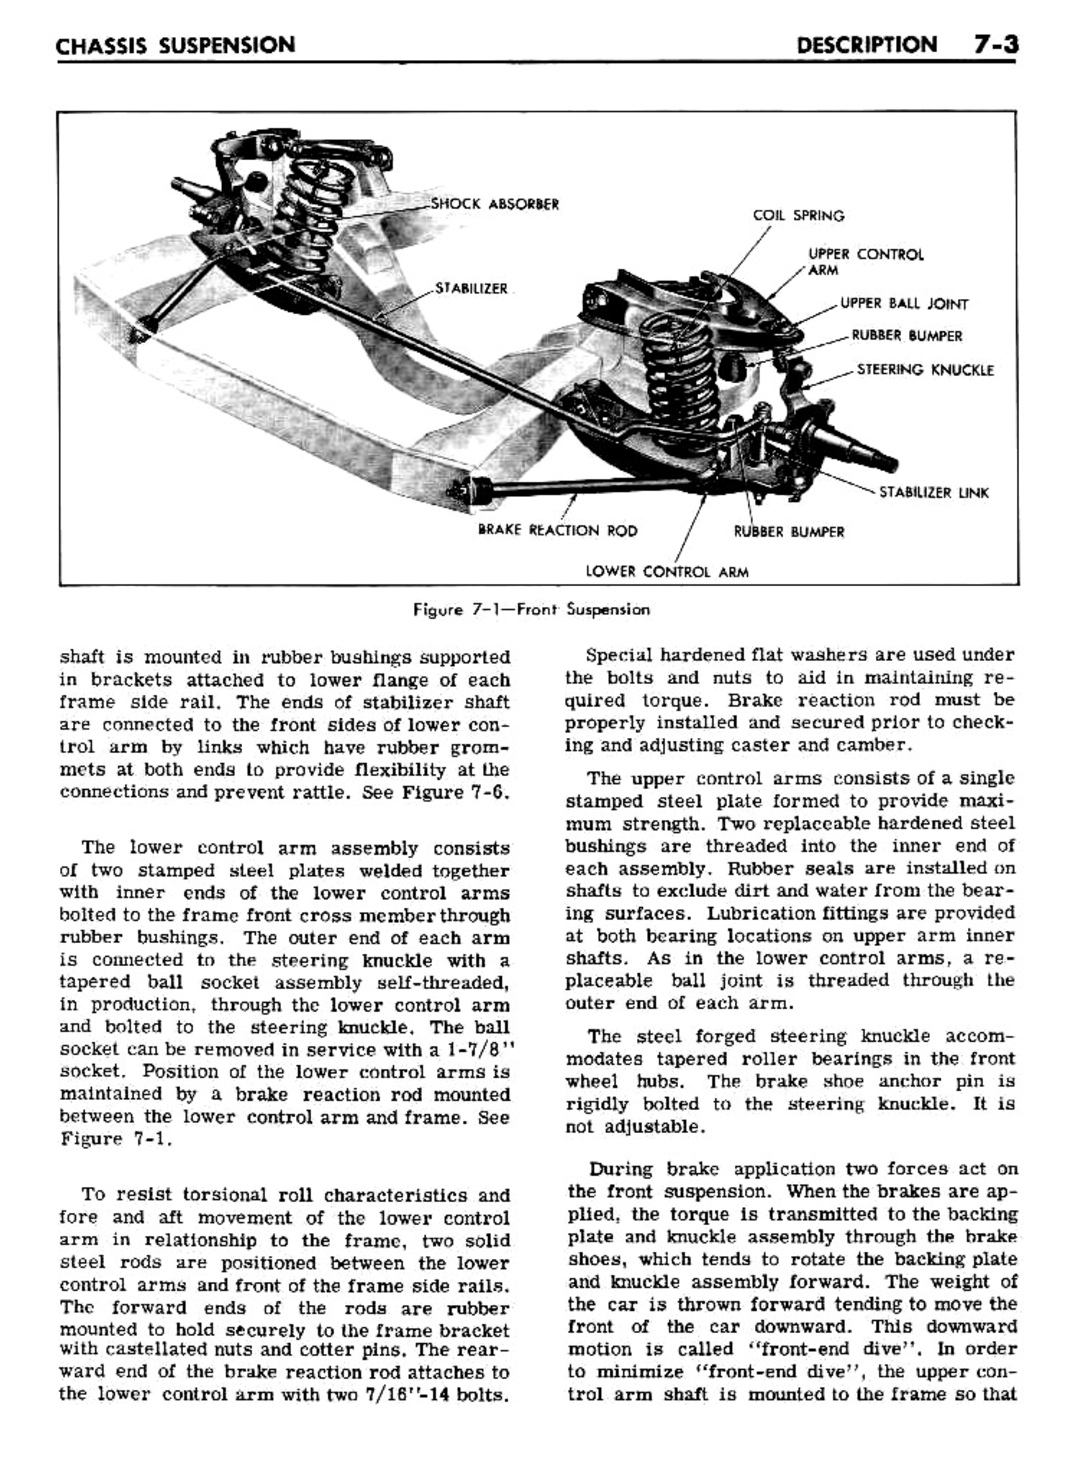 n_07 1961 Buick Shop Manual - Chassis Suspension-003-003.jpg